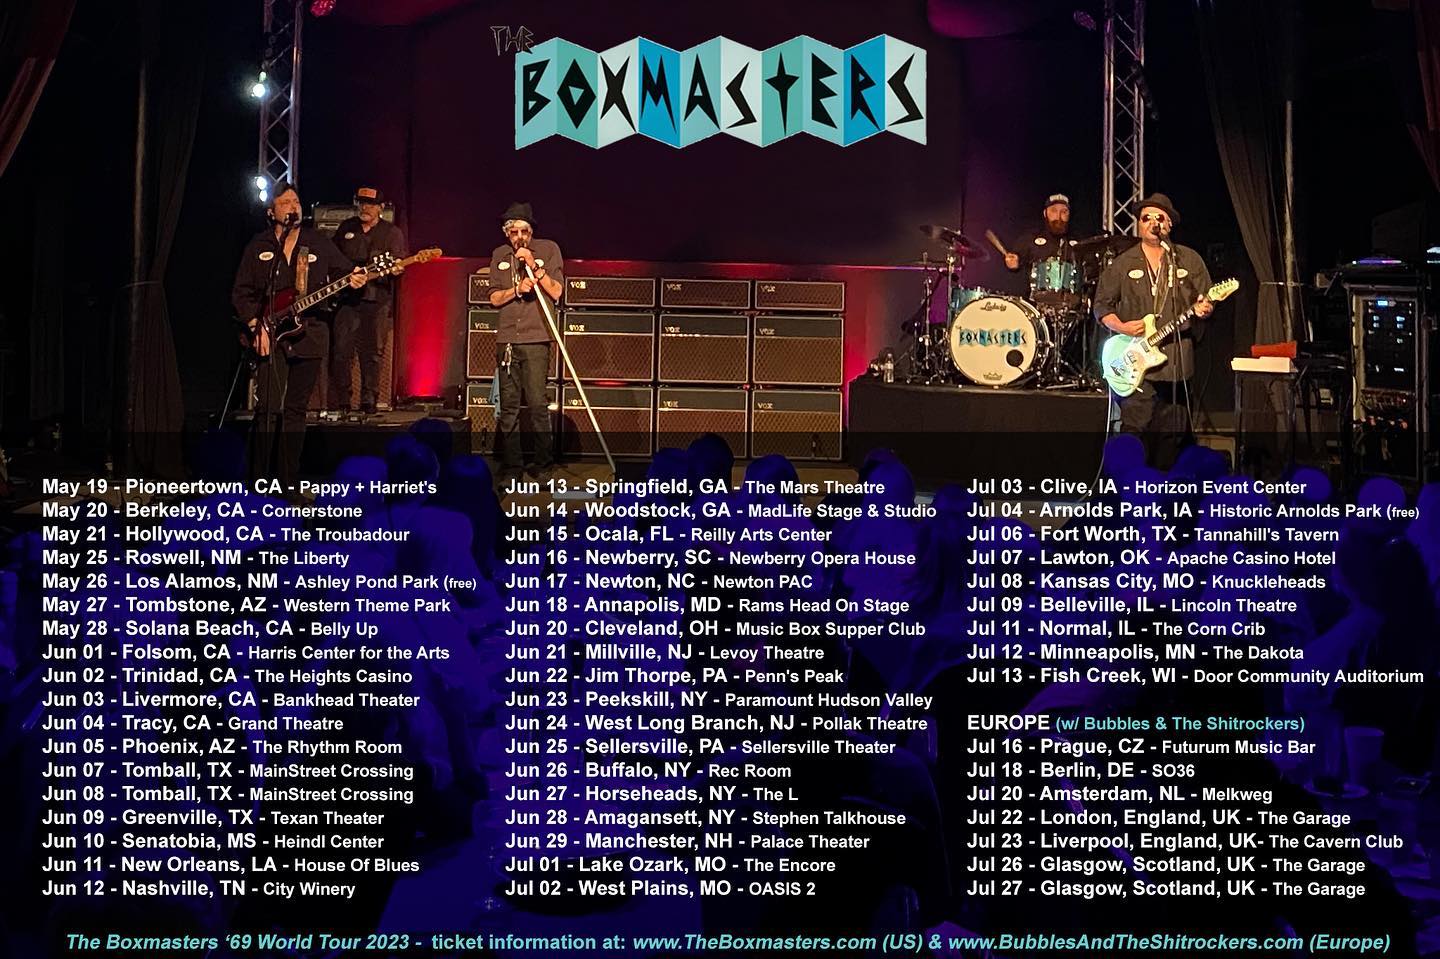 The Complete Tour Dates for The Boxmasters 69 Tours - U.S. and European Dates - Click Here